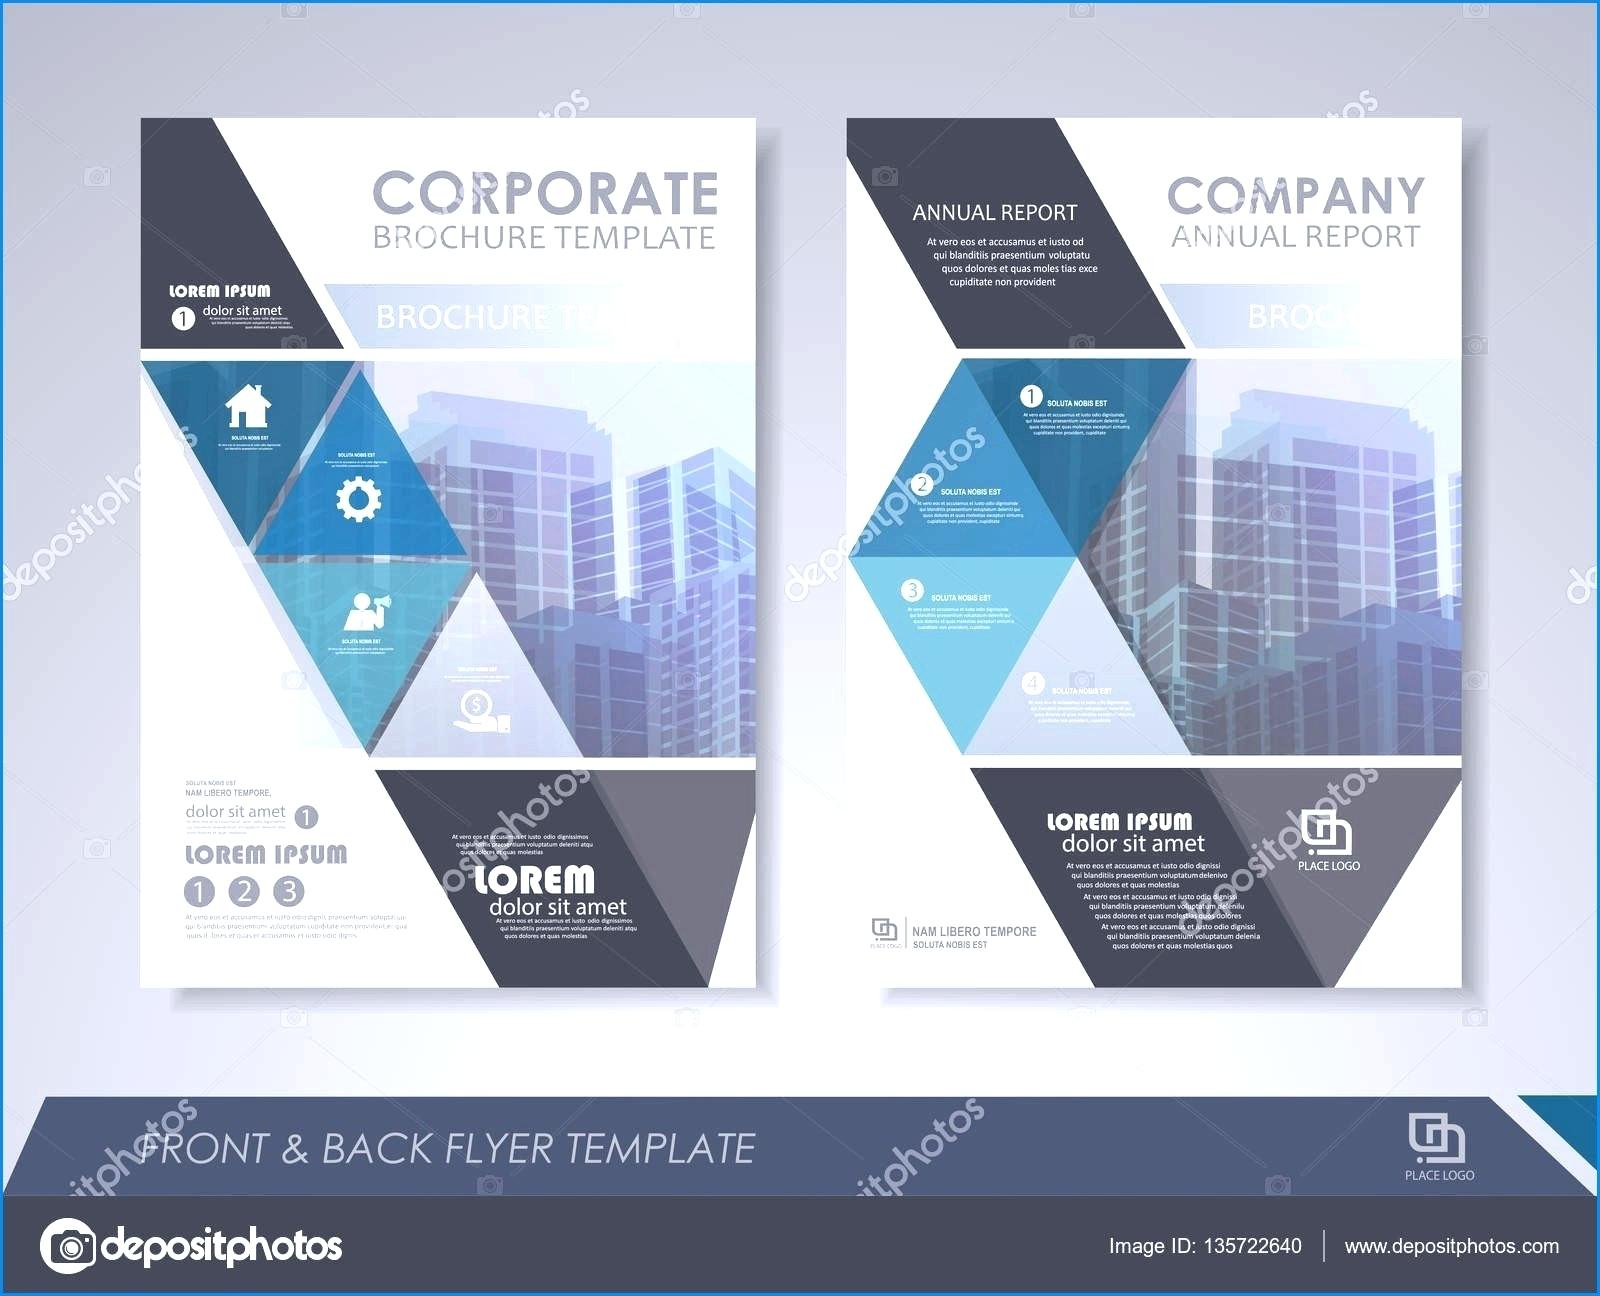 Brochure Templates Free Download – Goodwincolor.co For Engineering Brochure Templates Free Download